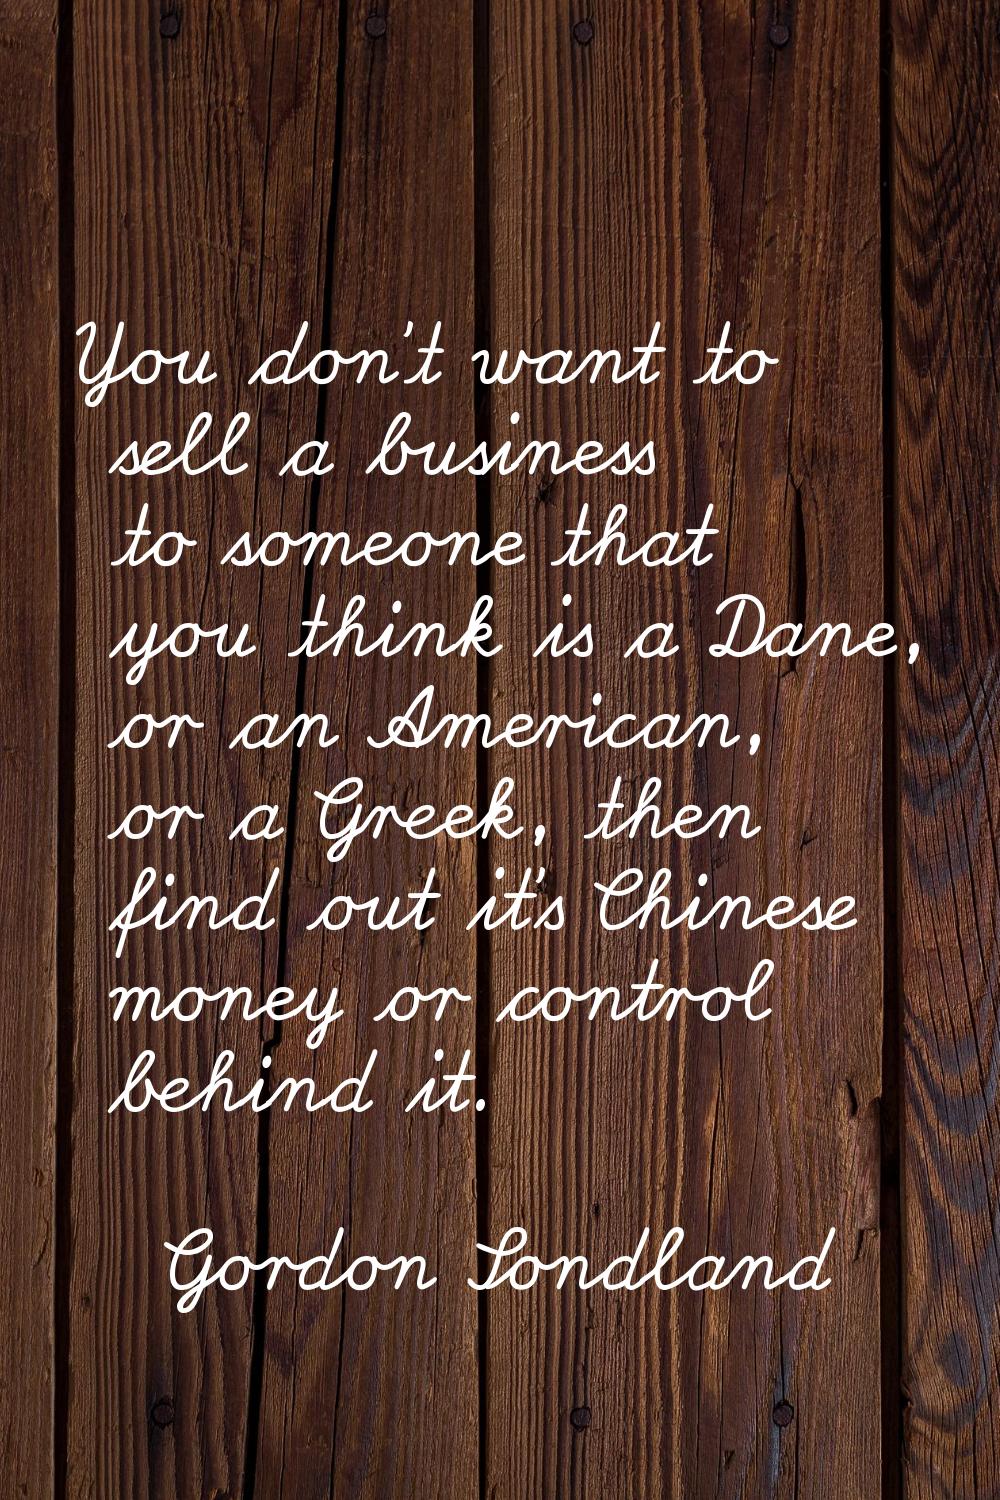 You don't want to sell a business to someone that you think is a Dane, or an American, or a Greek, 